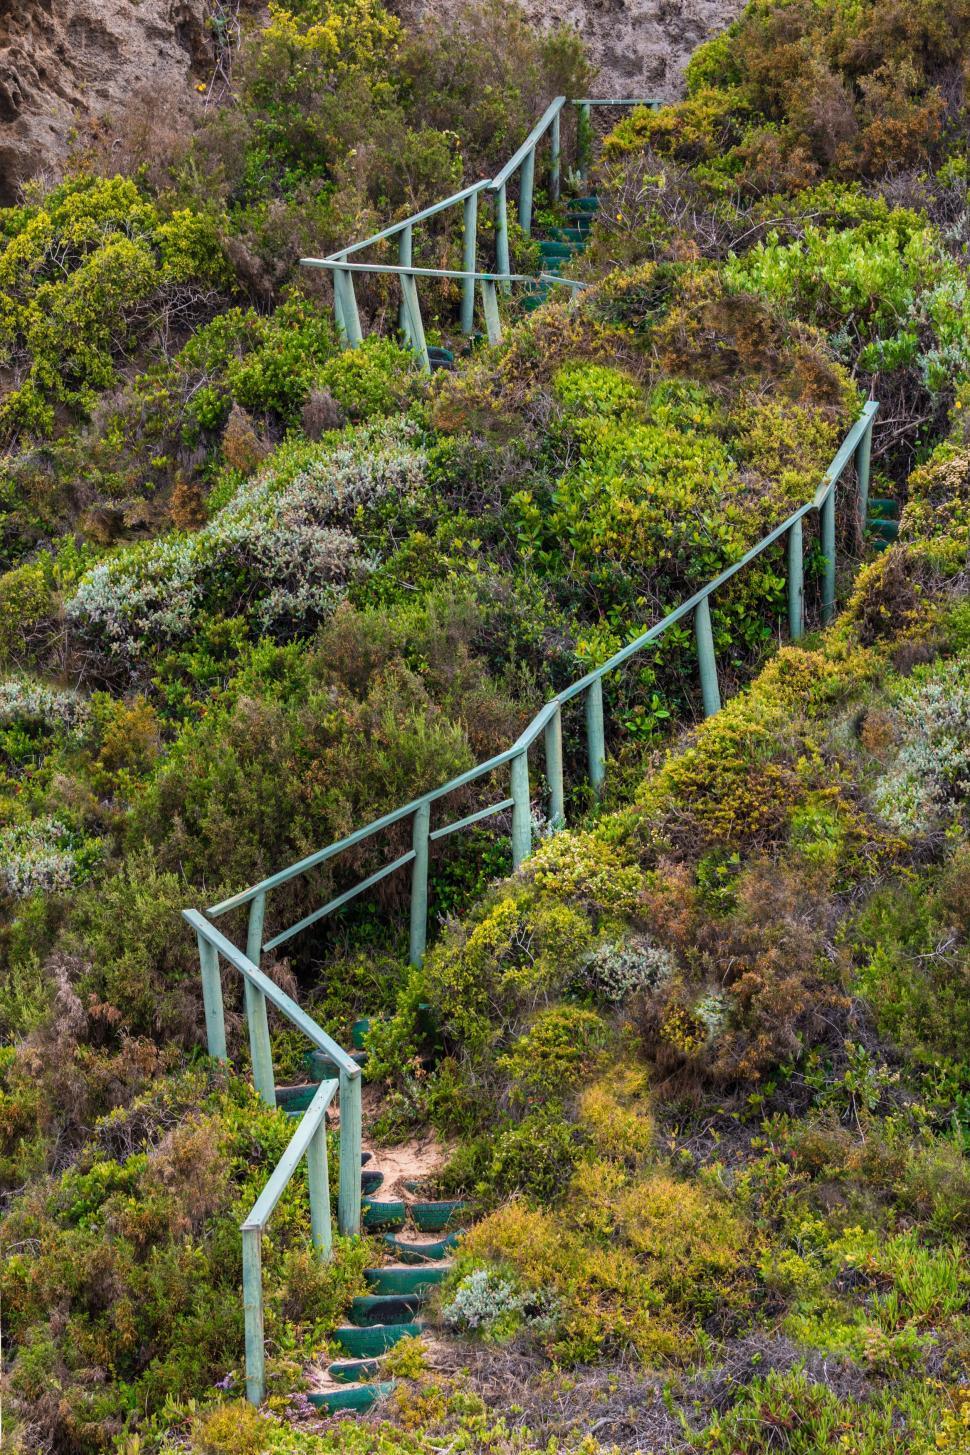 Free Image of Stairs Ascending a Grassy Hill 